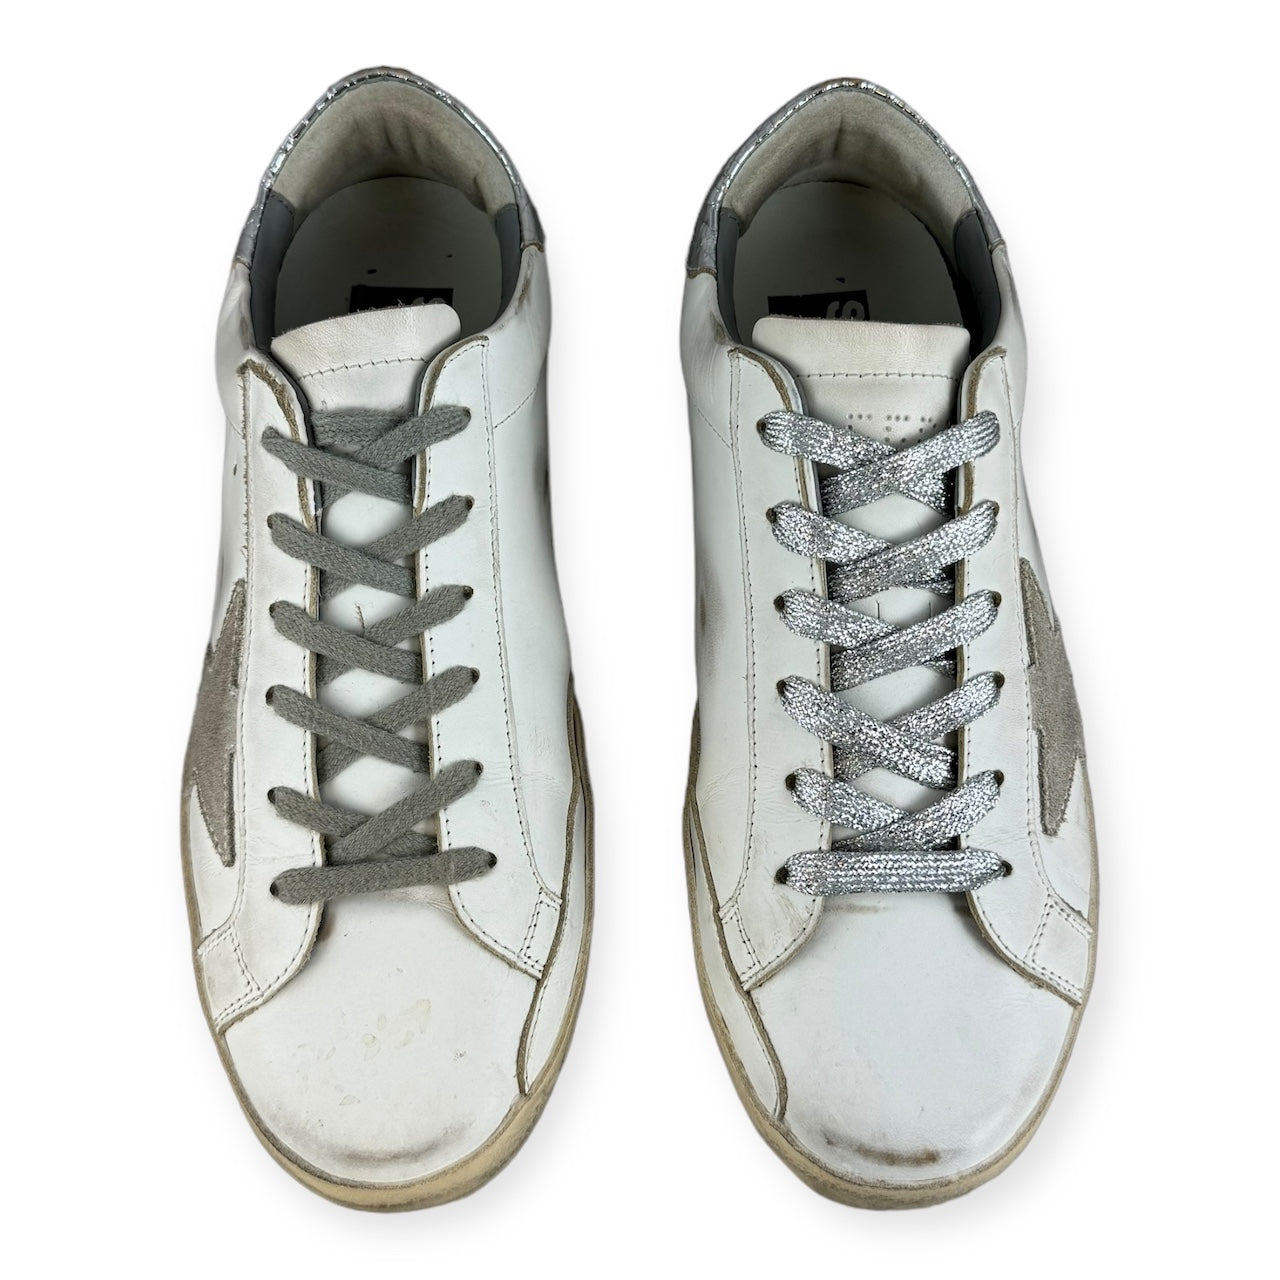 GOLDEN GOOSE Superstar Sneakers in White | Size 39